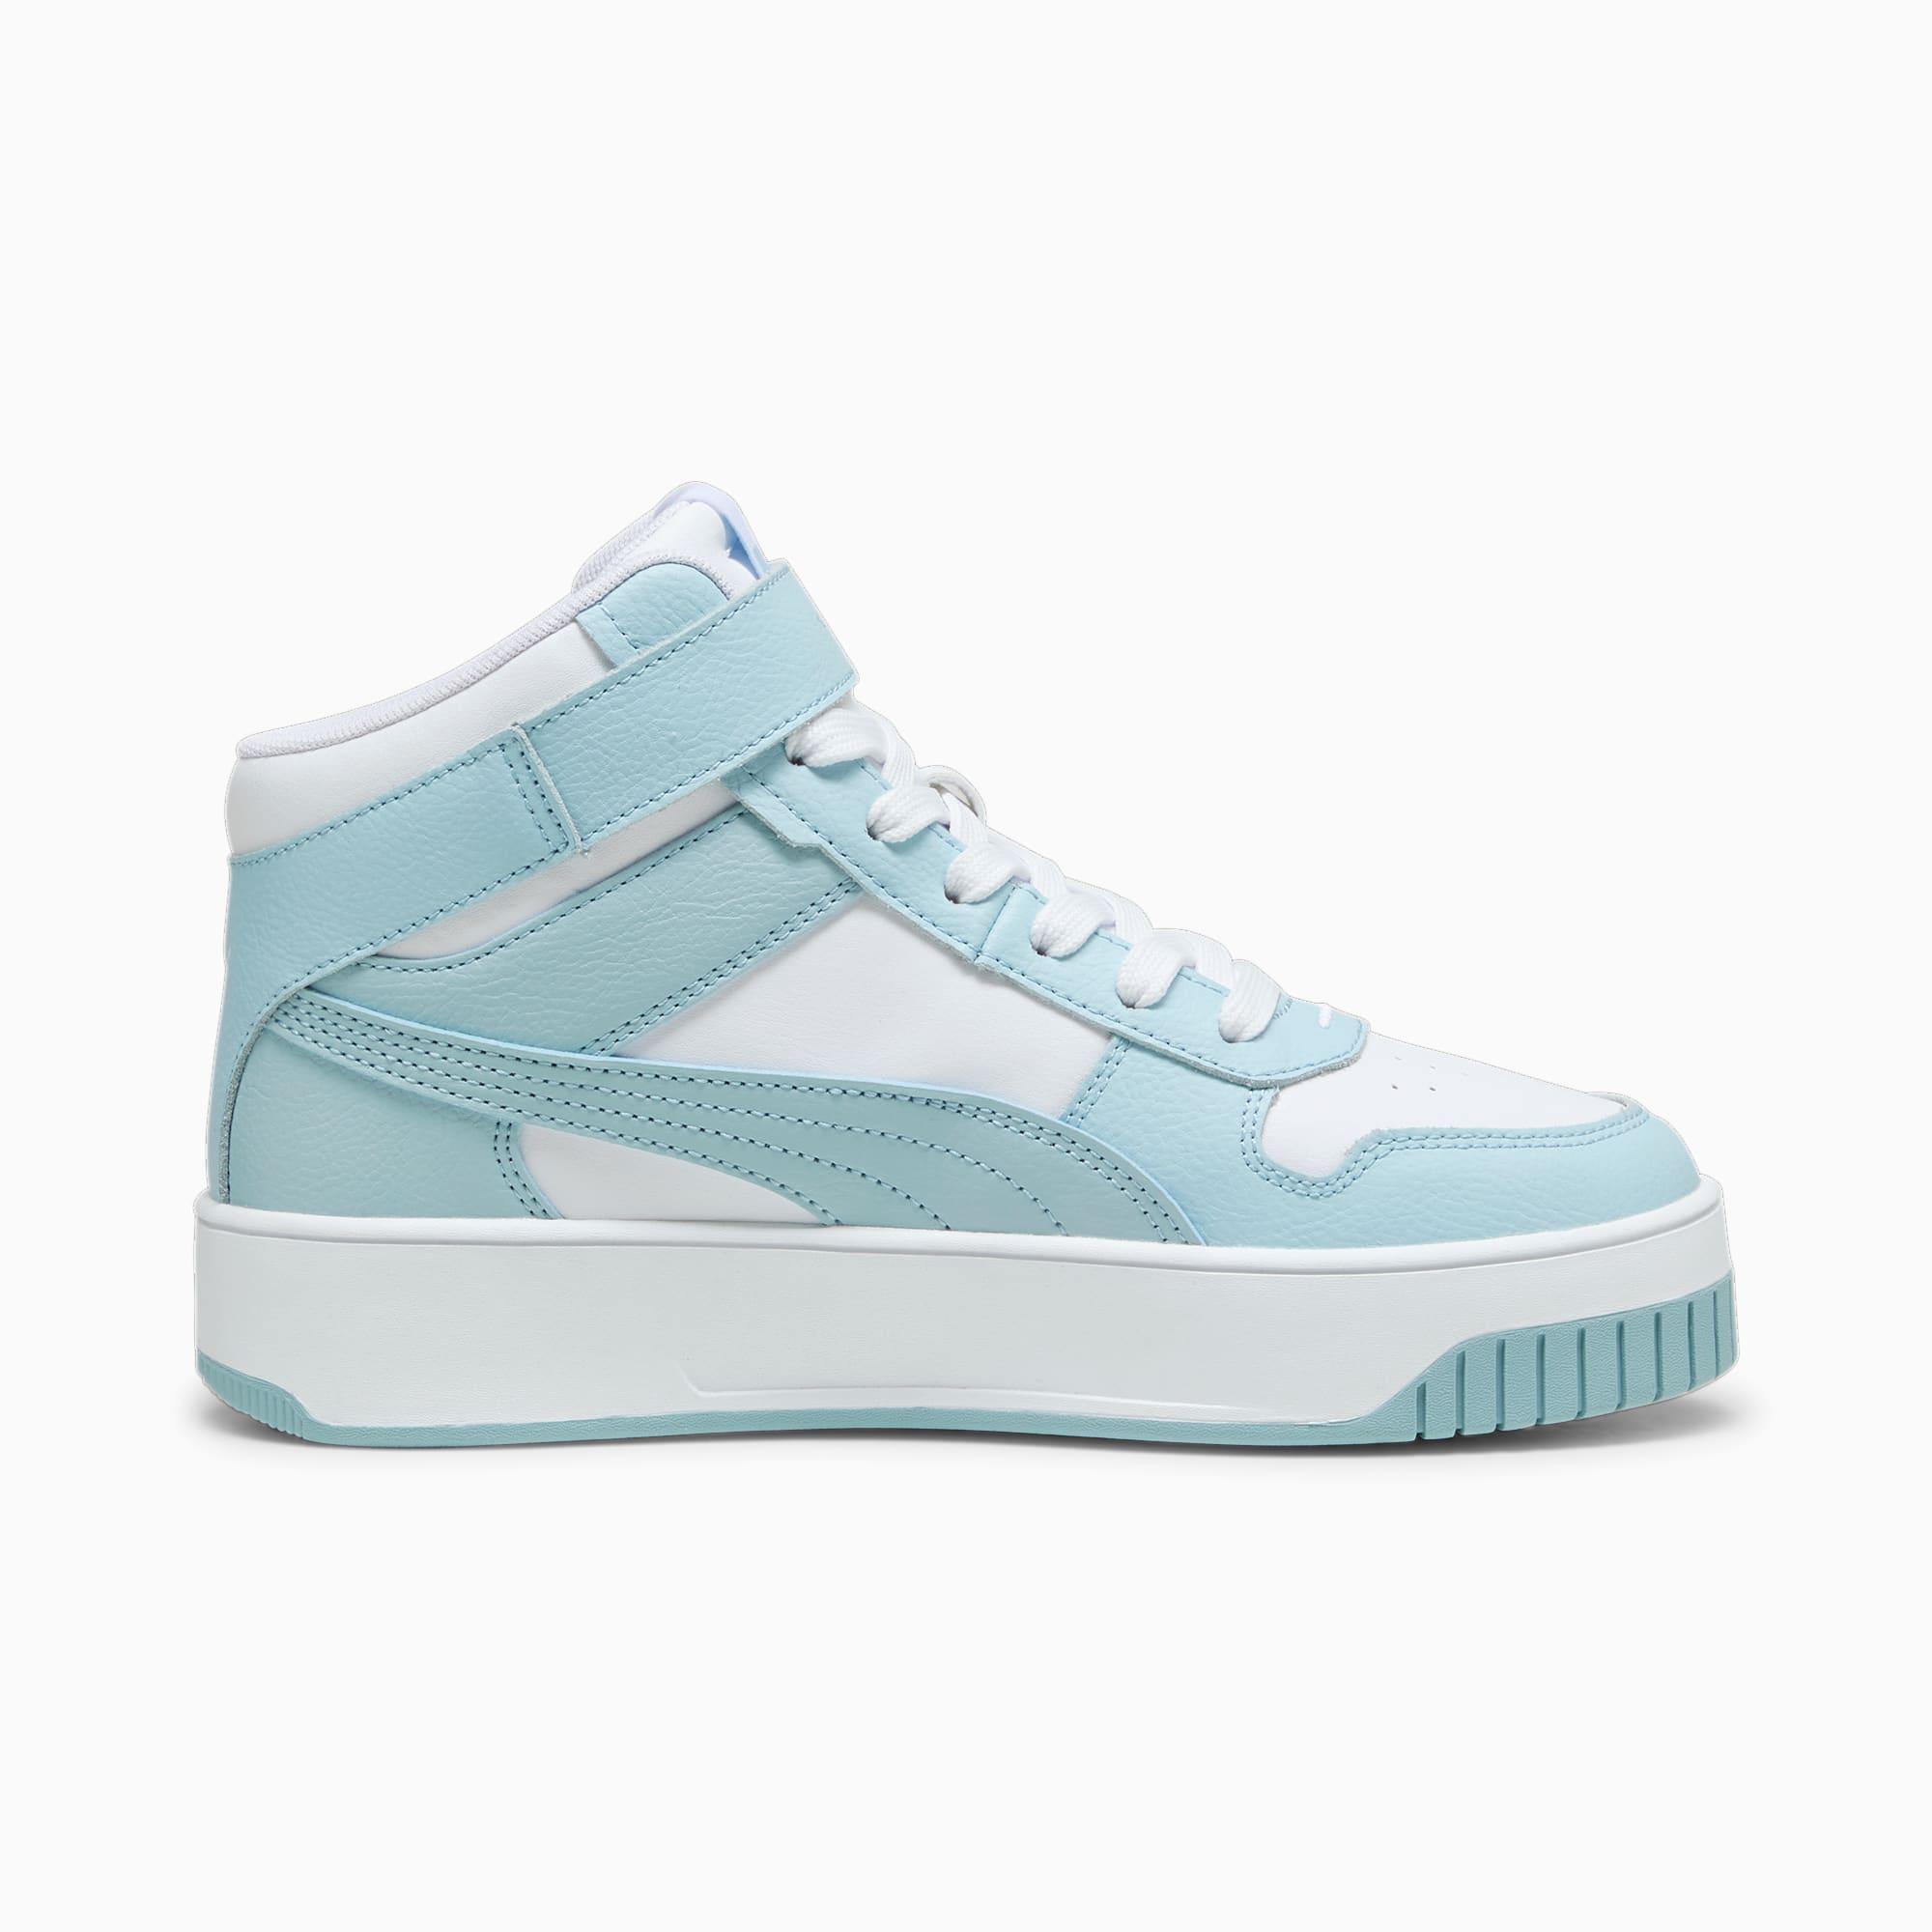 PUMA Carina Street Mid Women's Sneakers, White/Turquoise Surf, Size 38,5, Shoes